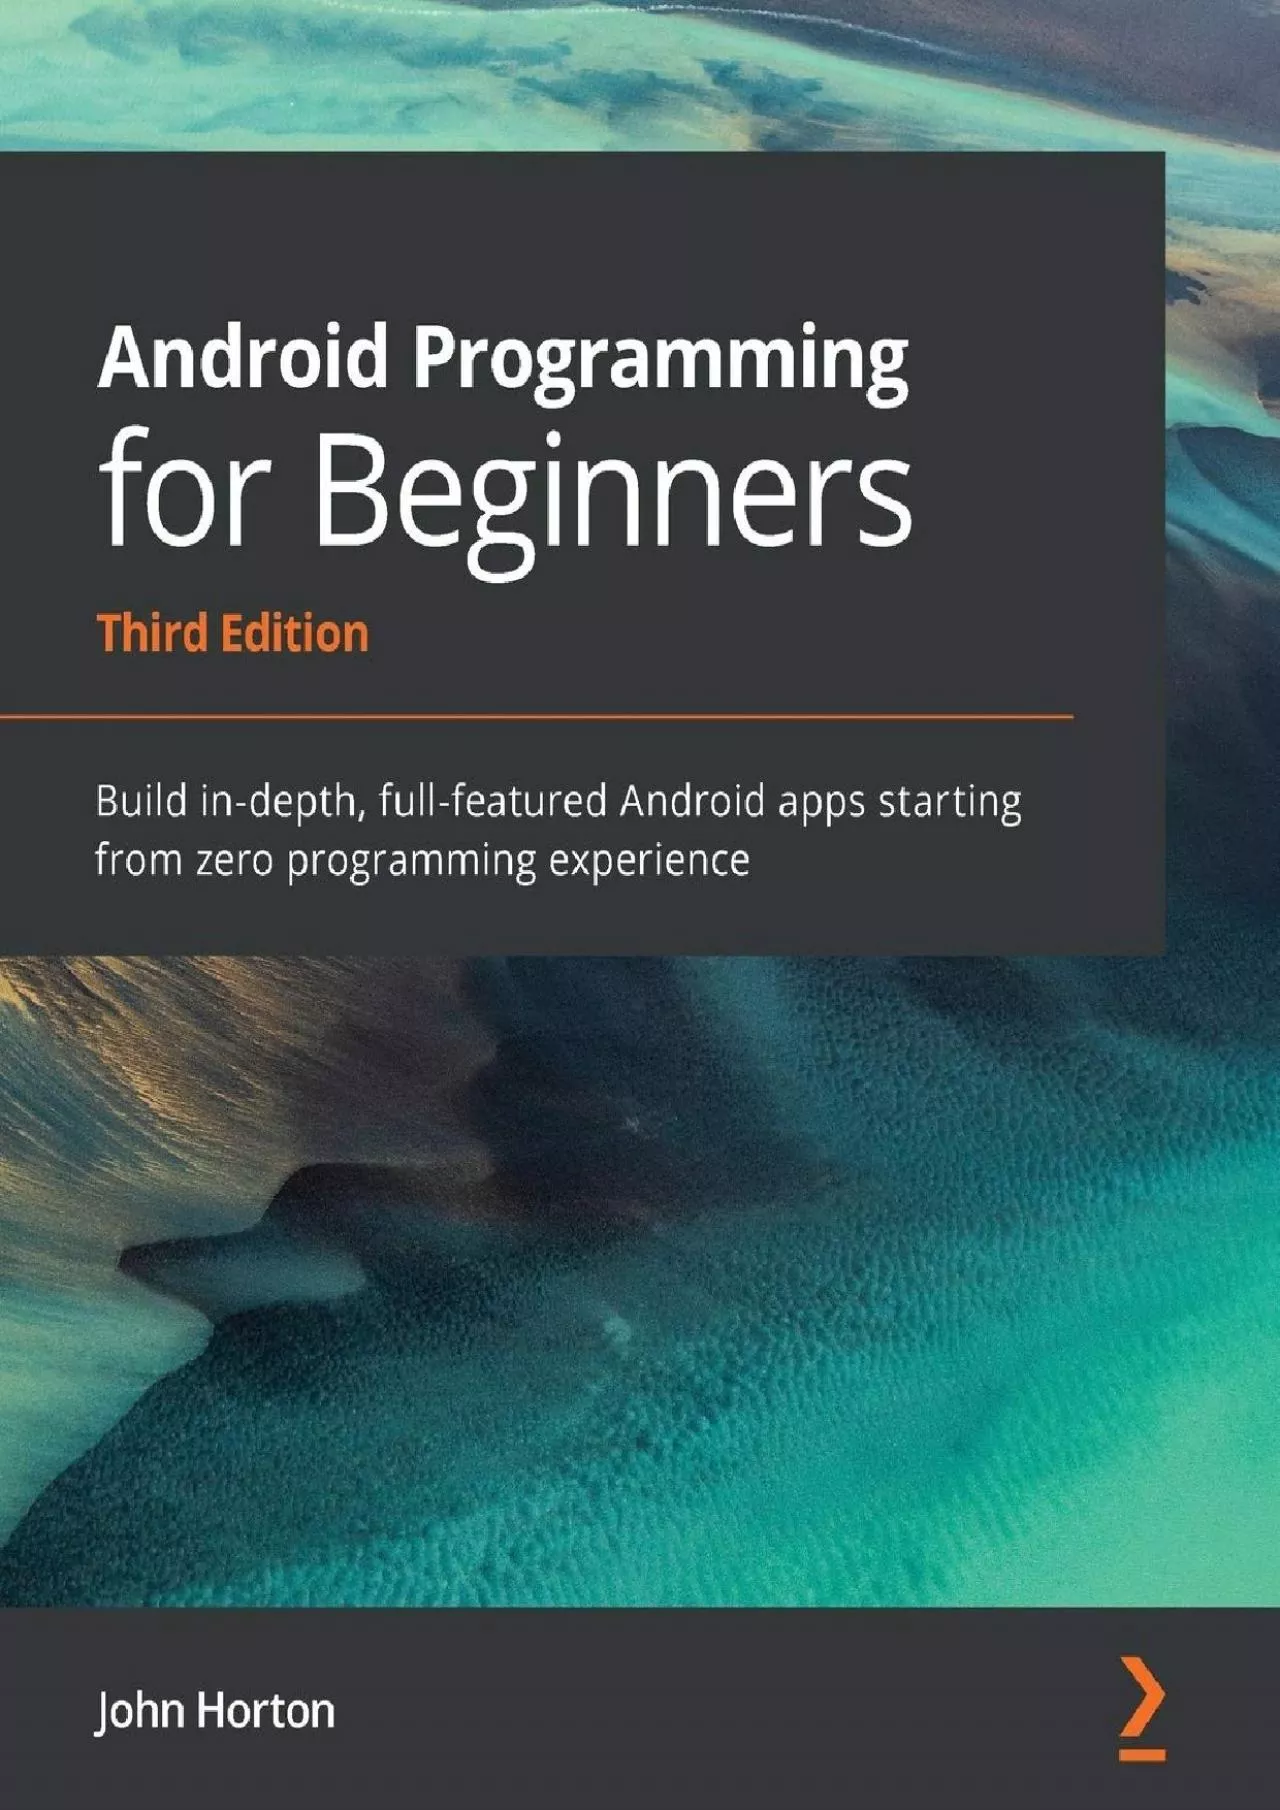 [FREE]-Android Programming for Beginners: Build in-depth, full-featured Android apps starting